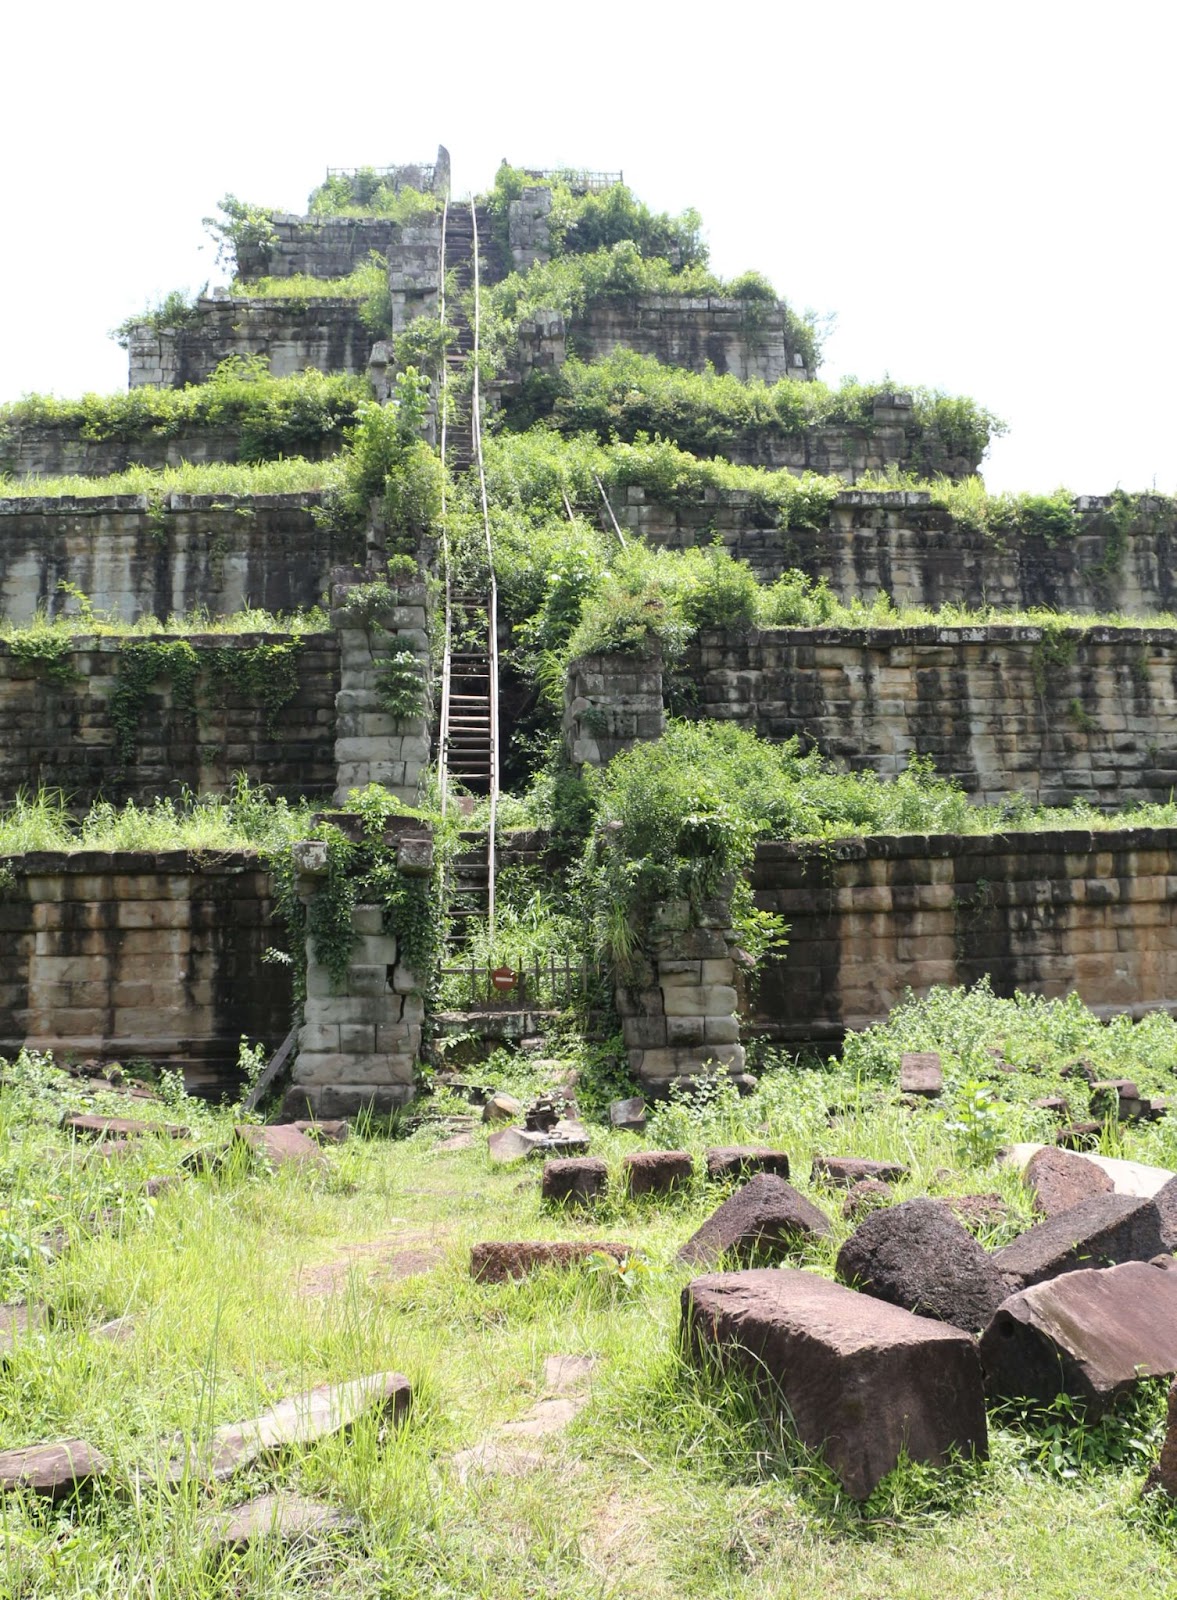 Koh Ker is the only stepped pyramid temple in South East Asia.